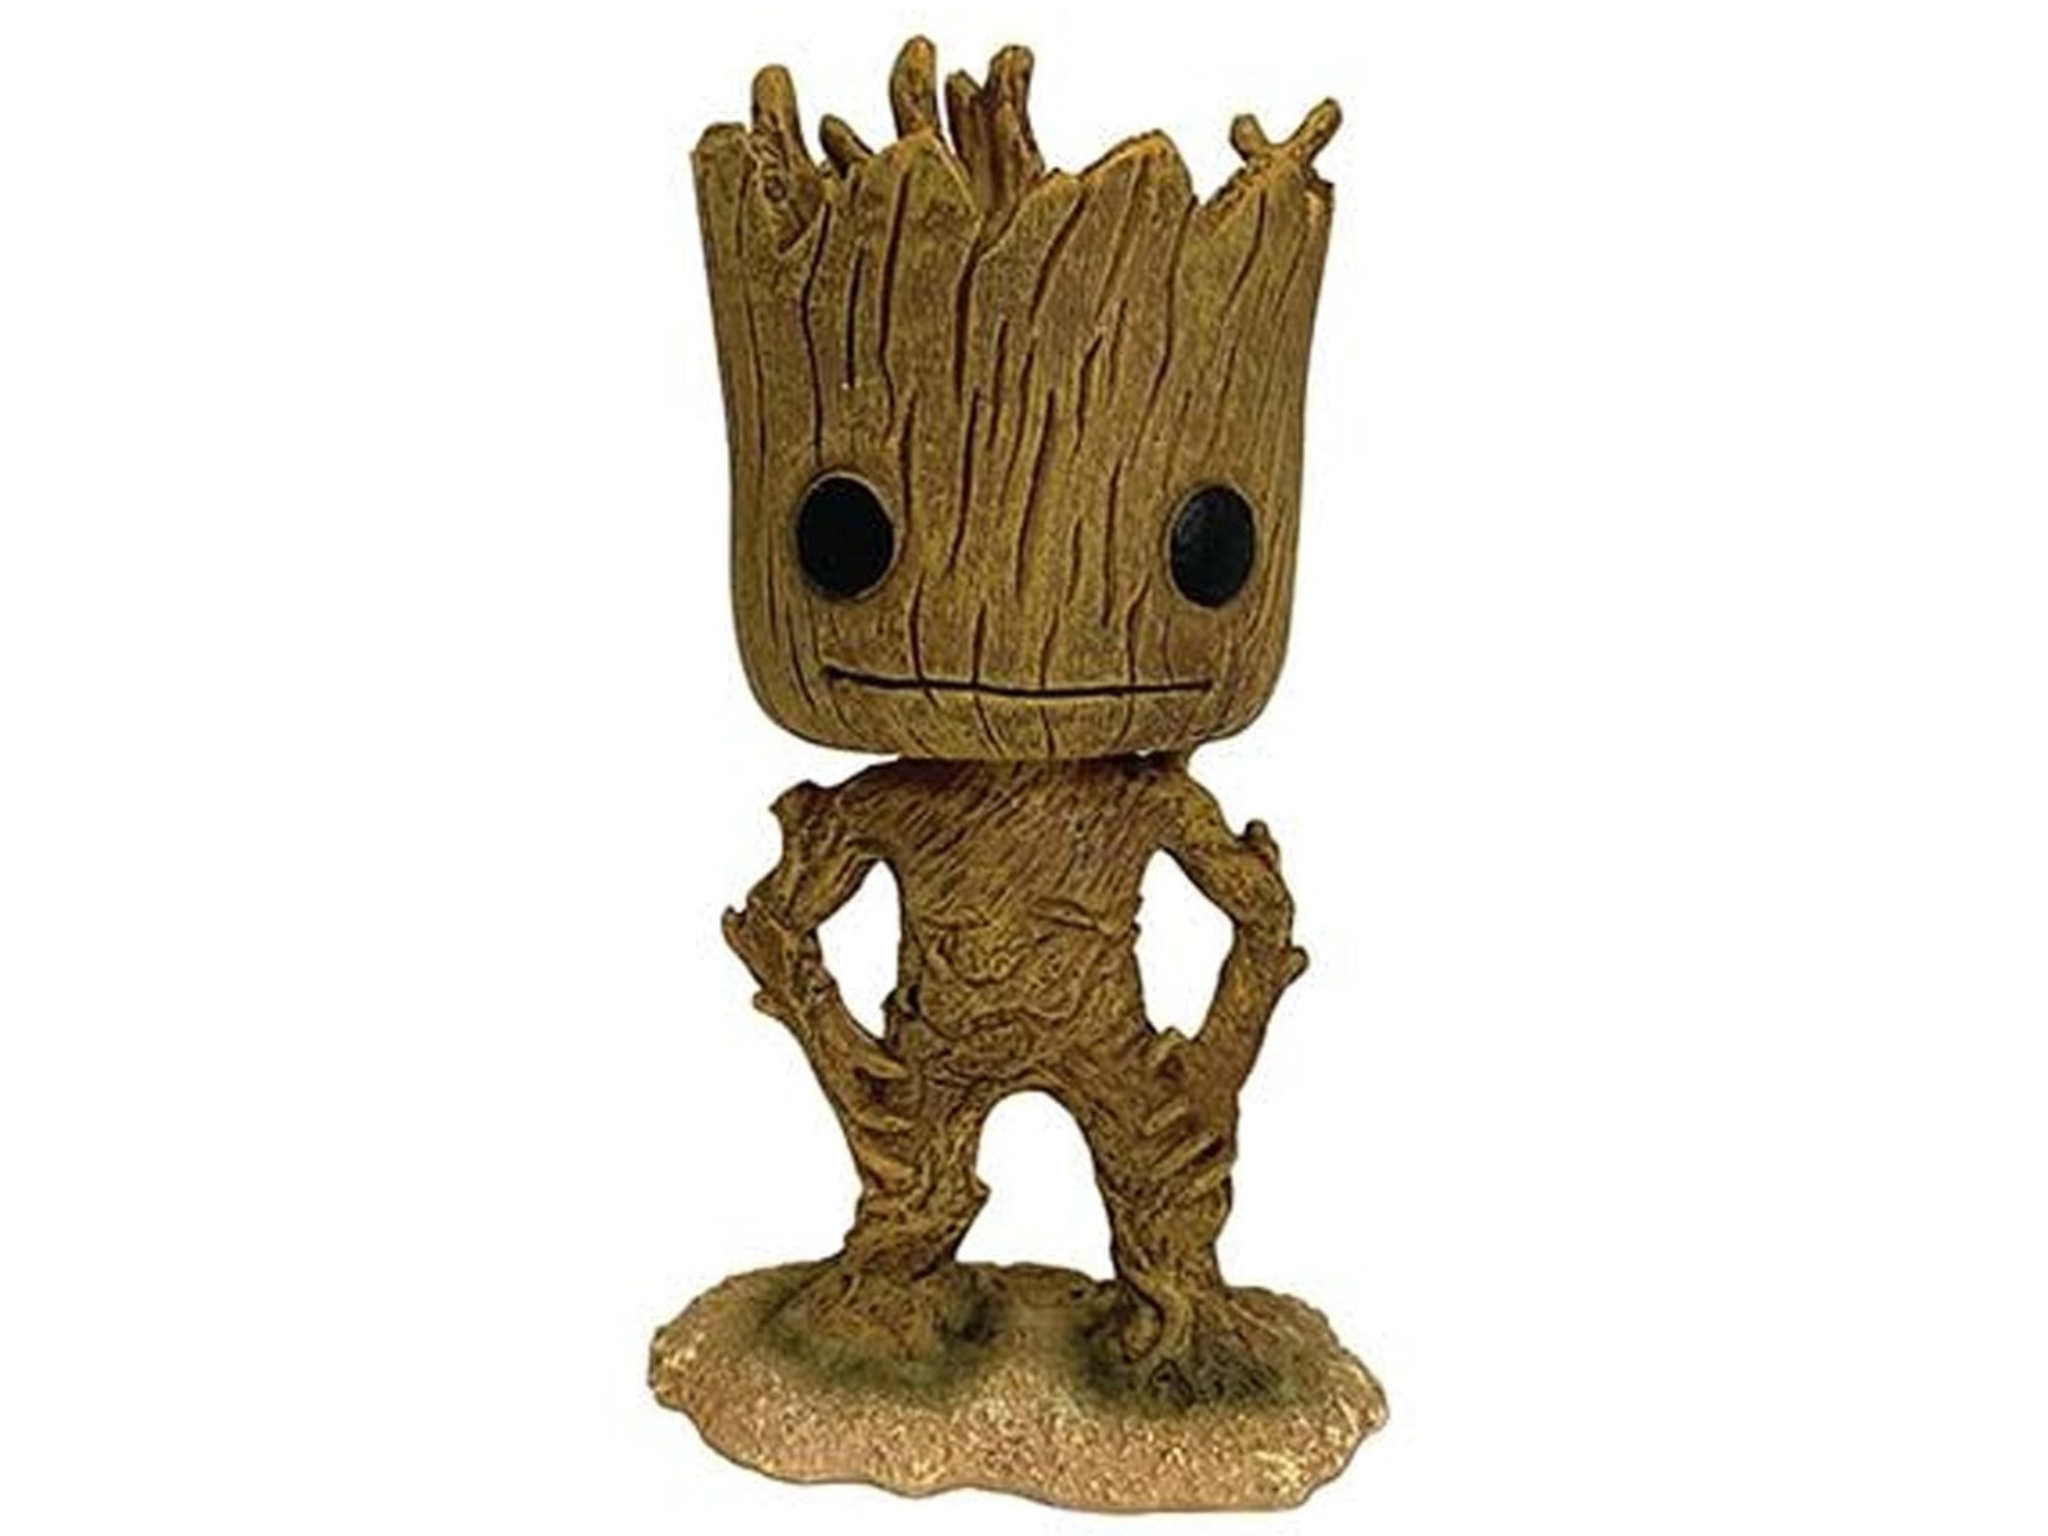 DIY Kit for a Baby Groot